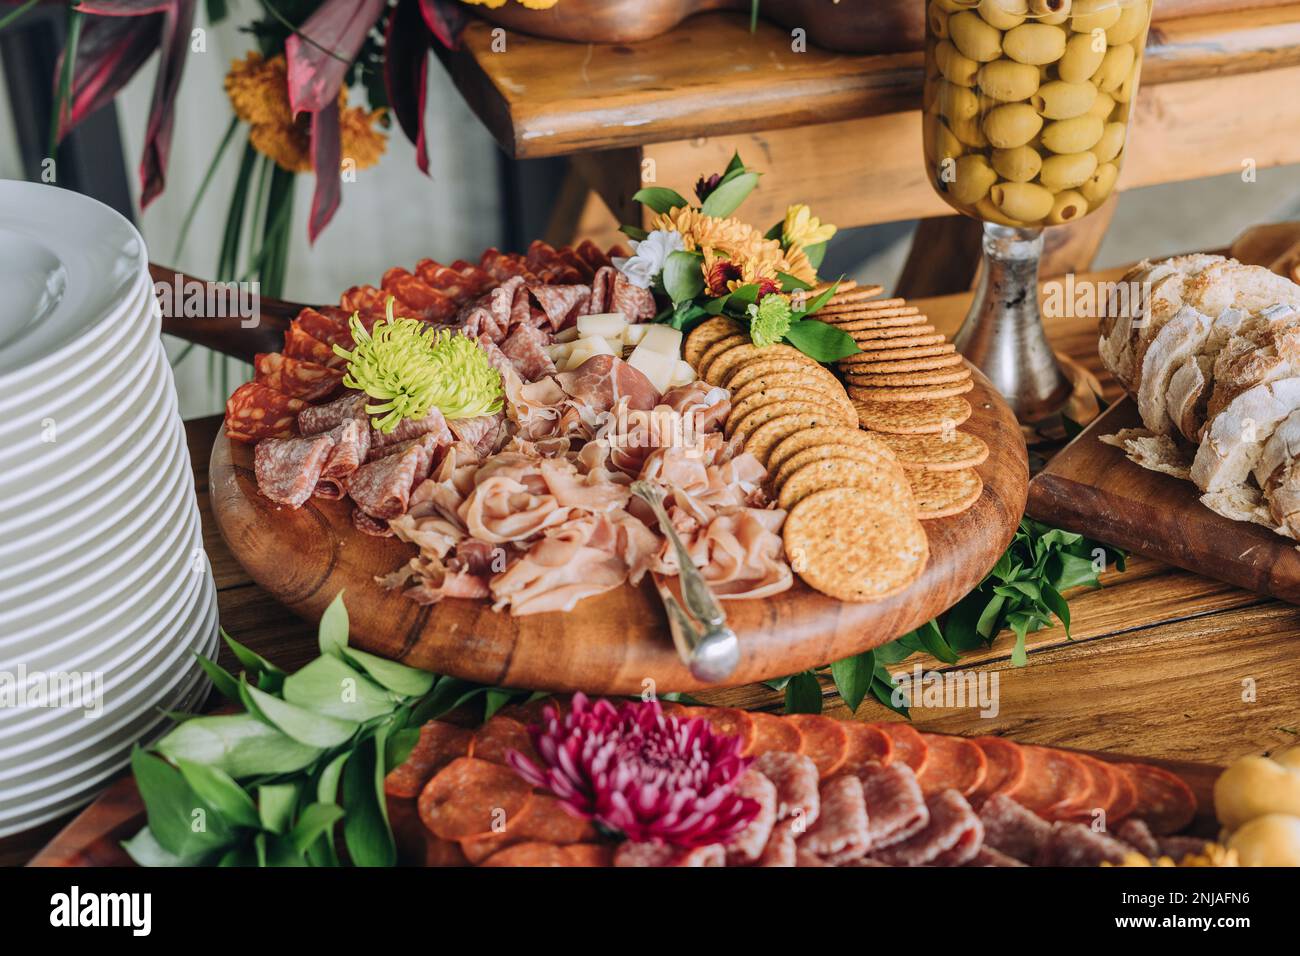 An abundant selection of cured meats, crackers, and olives served on decorative platters Stock Photo